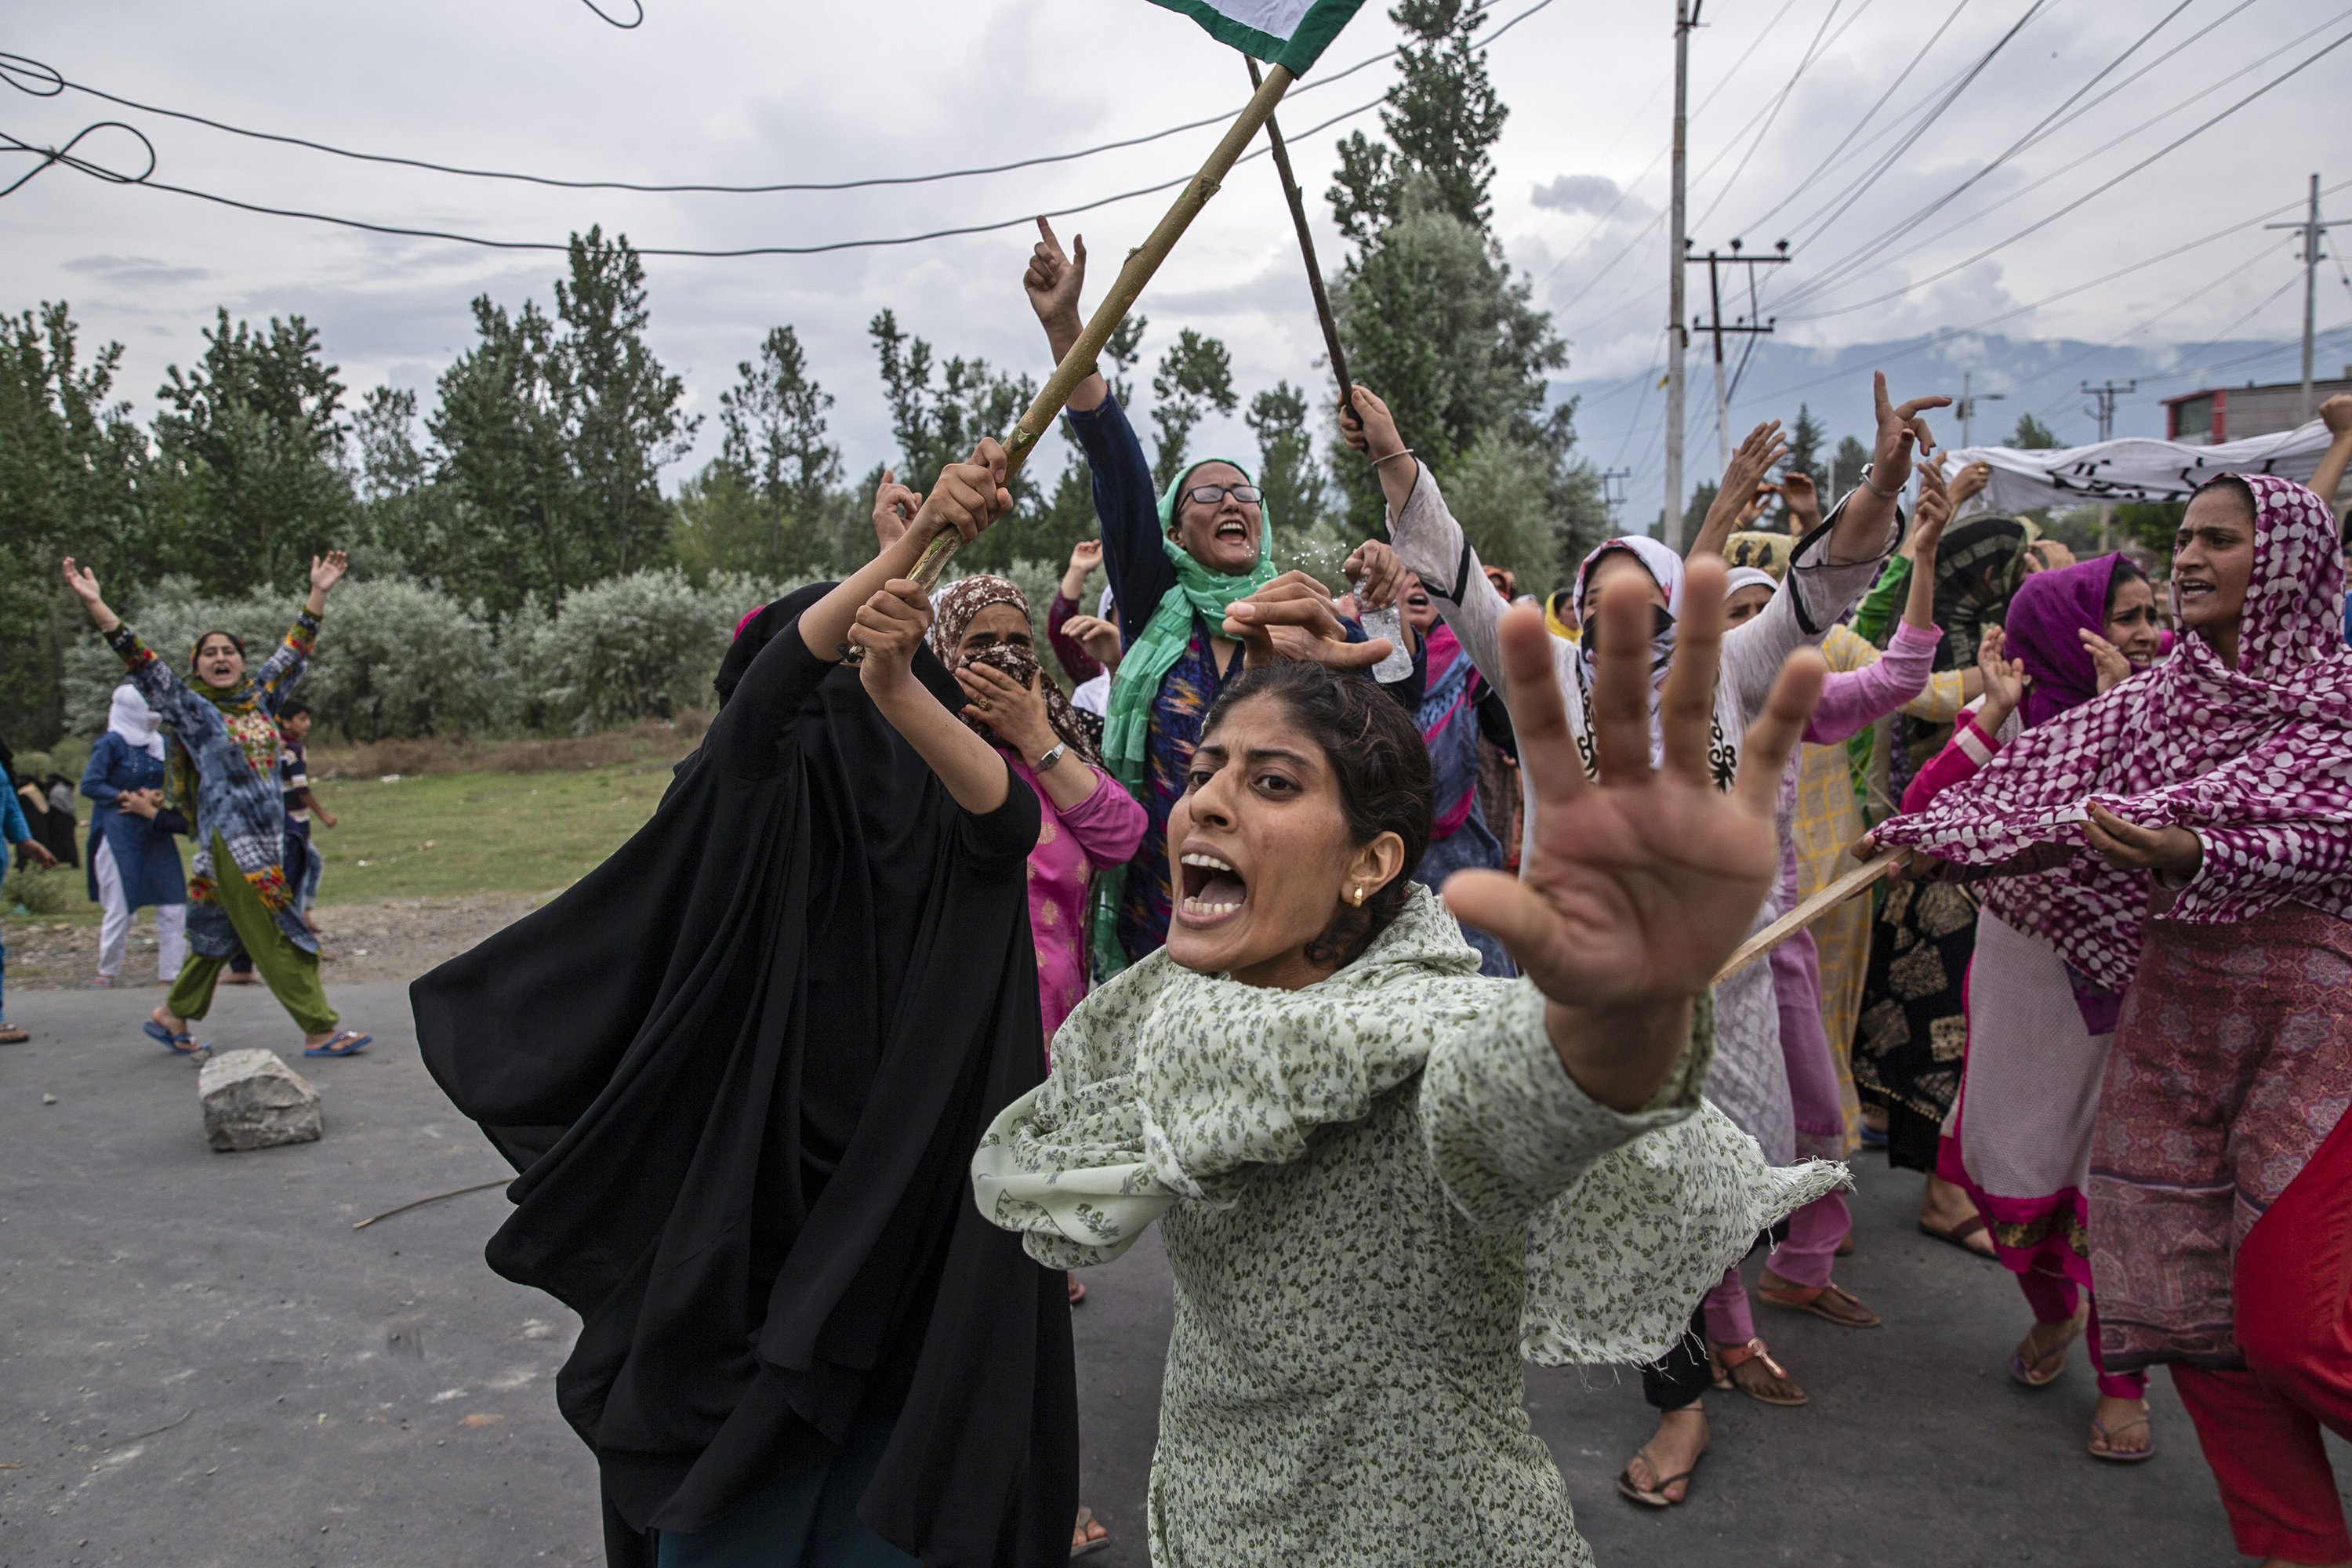 Associated Press wins feature photography Pulitzer for Kashmir coverage